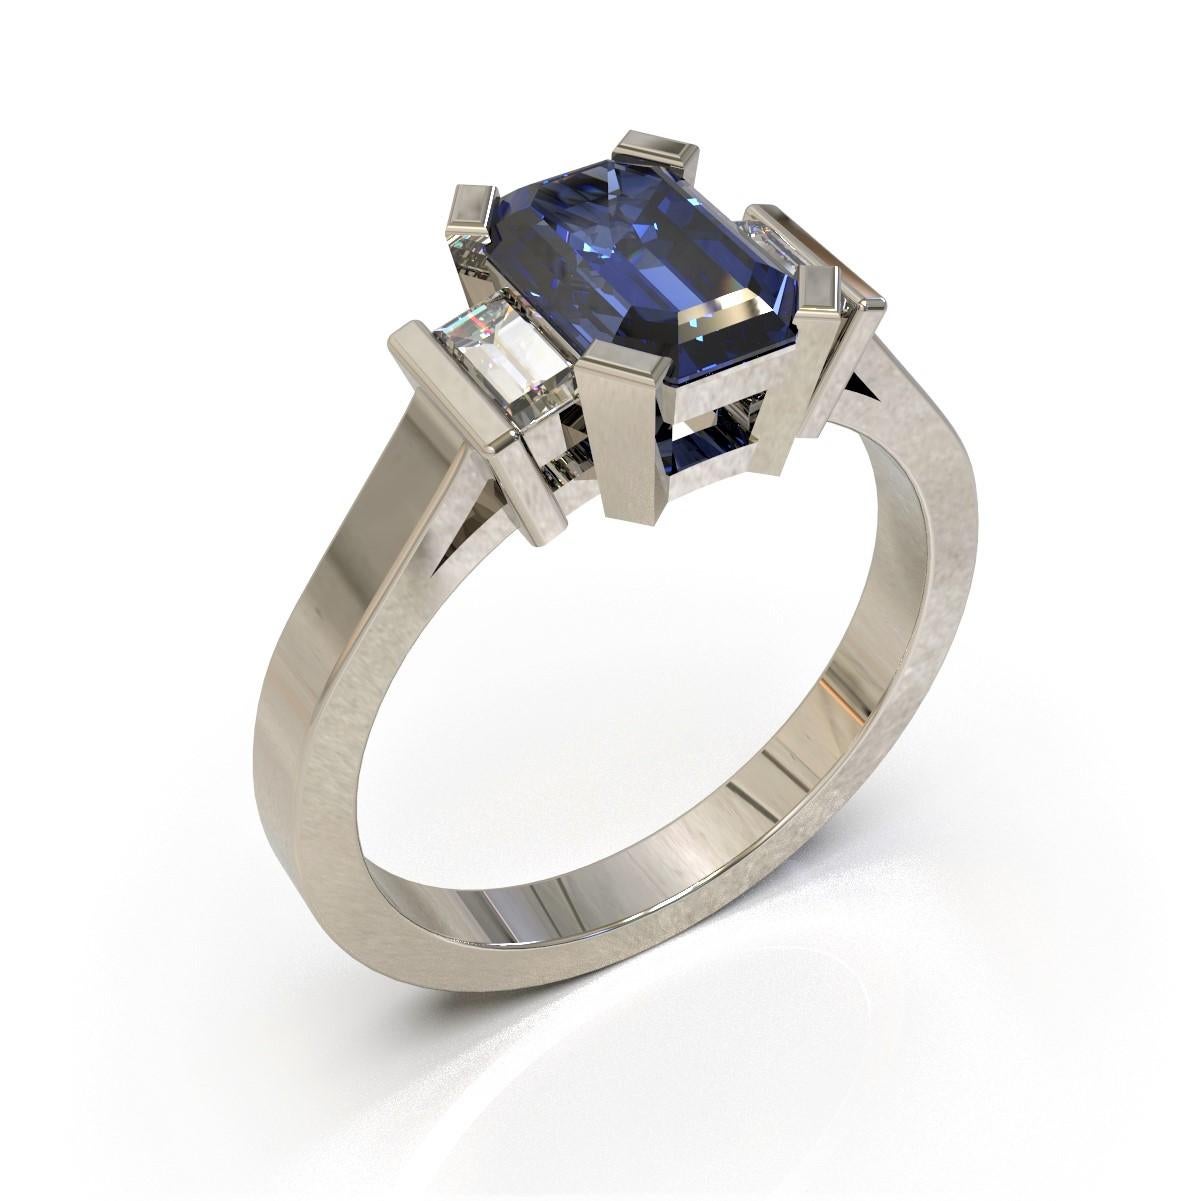 Ceylon Zaffiro Ring

Art Deco style, this elegant ring is made in platinum and set with a stunning Ceylon sapphire with a pair of baguette diamonds on either side.

Emerald faceted sapphire: Medium light strong blue. Eye Clean, Ceylon origin, 7.80 x